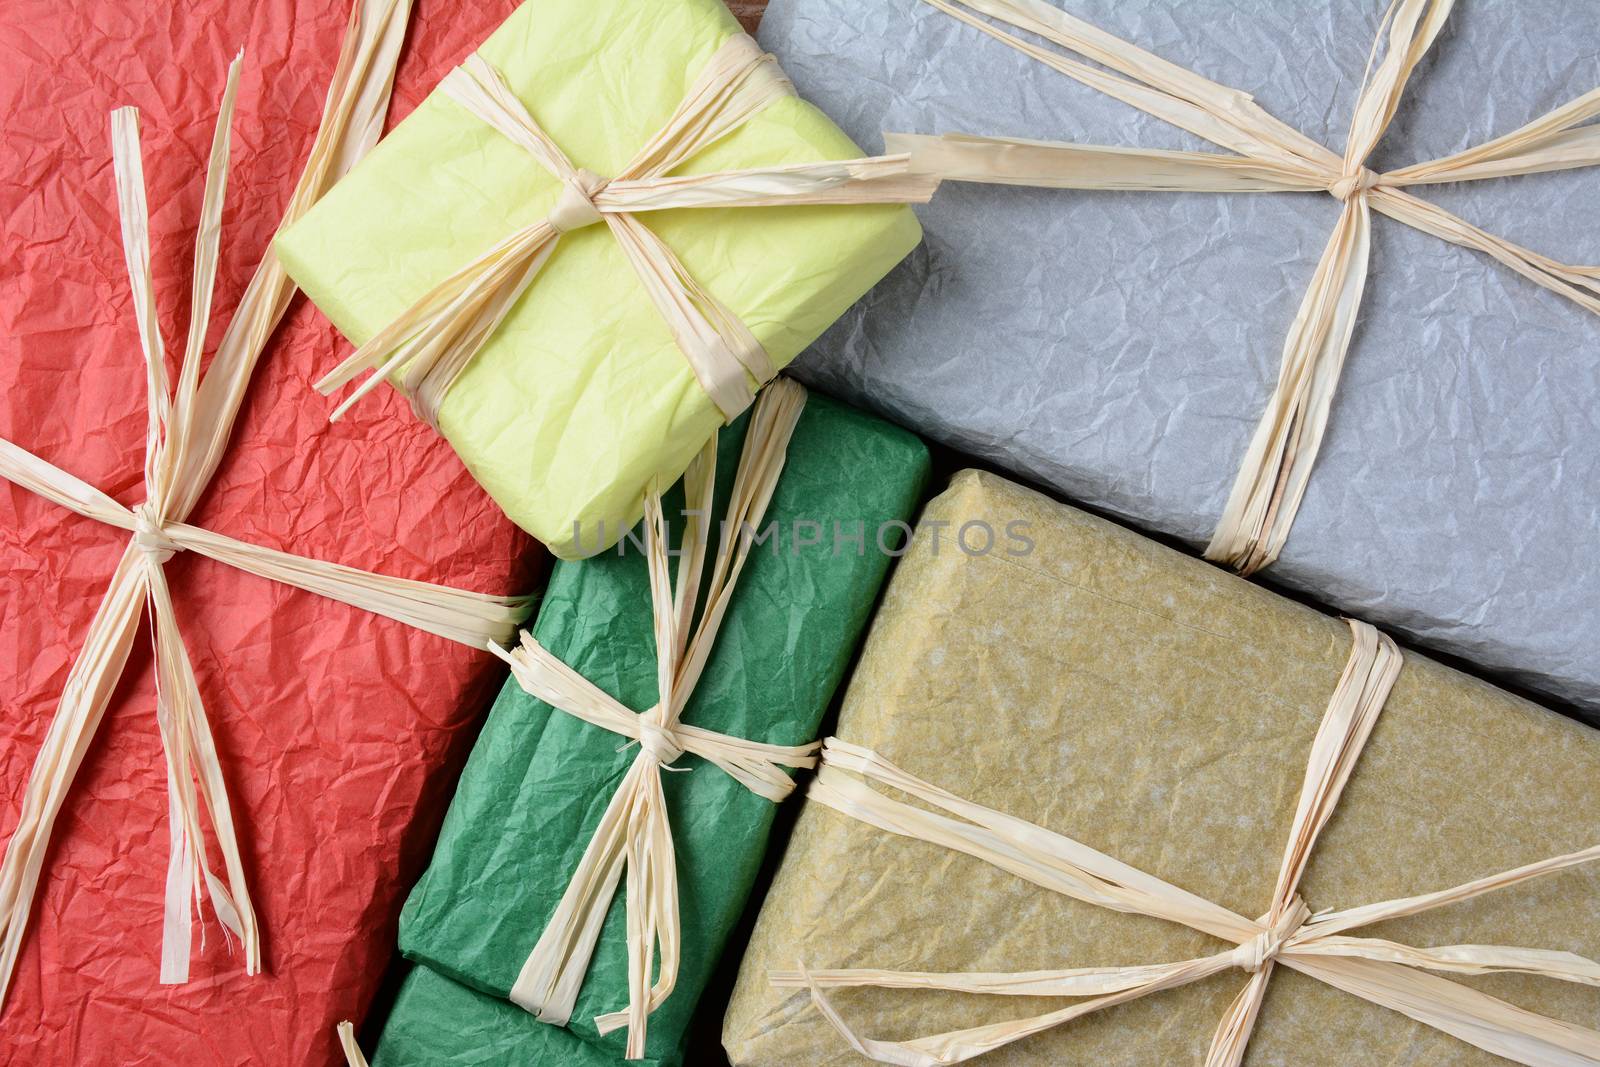 High angle closeup shot of a group of Christmas presents wrapped with colorful tissue paper. The gifts are tied with raffia. Horizontal format filling the frame.